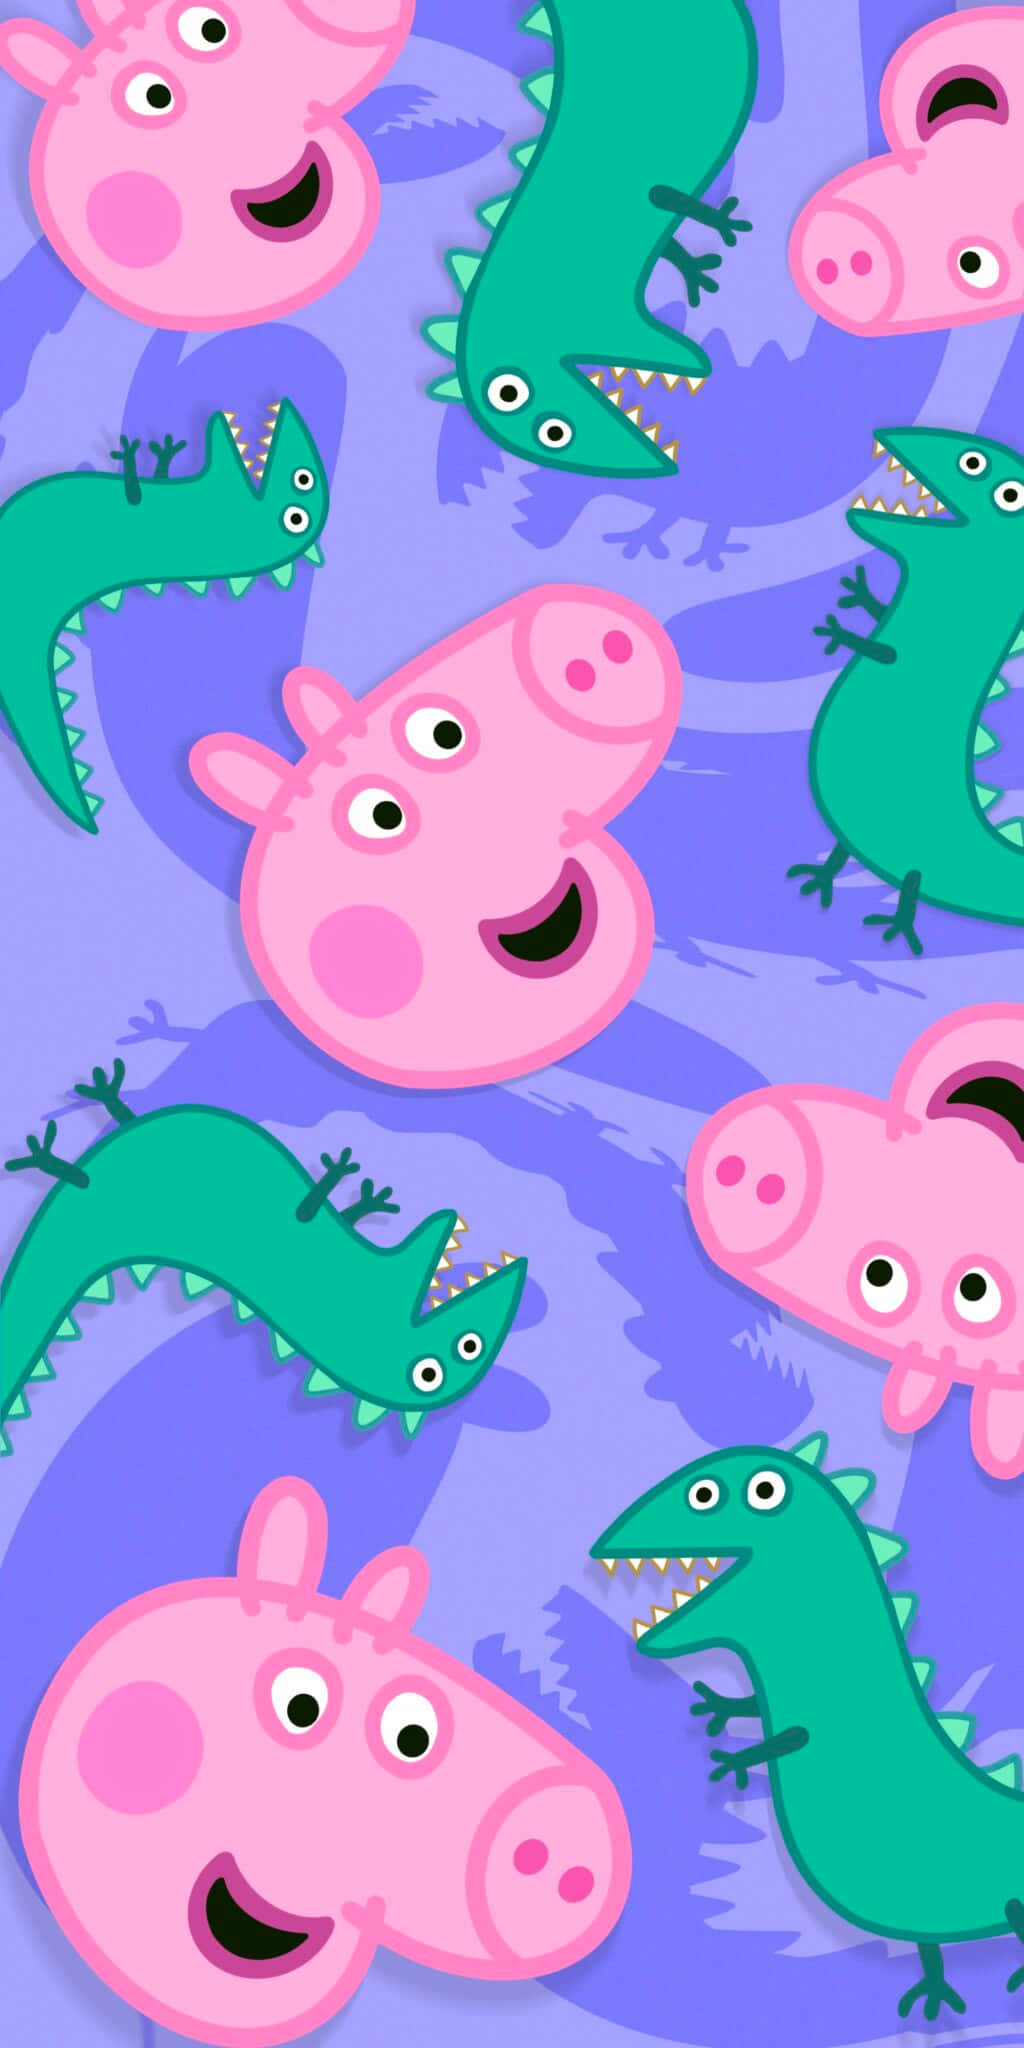 George Pig Has a Happy Day! Wallpaper